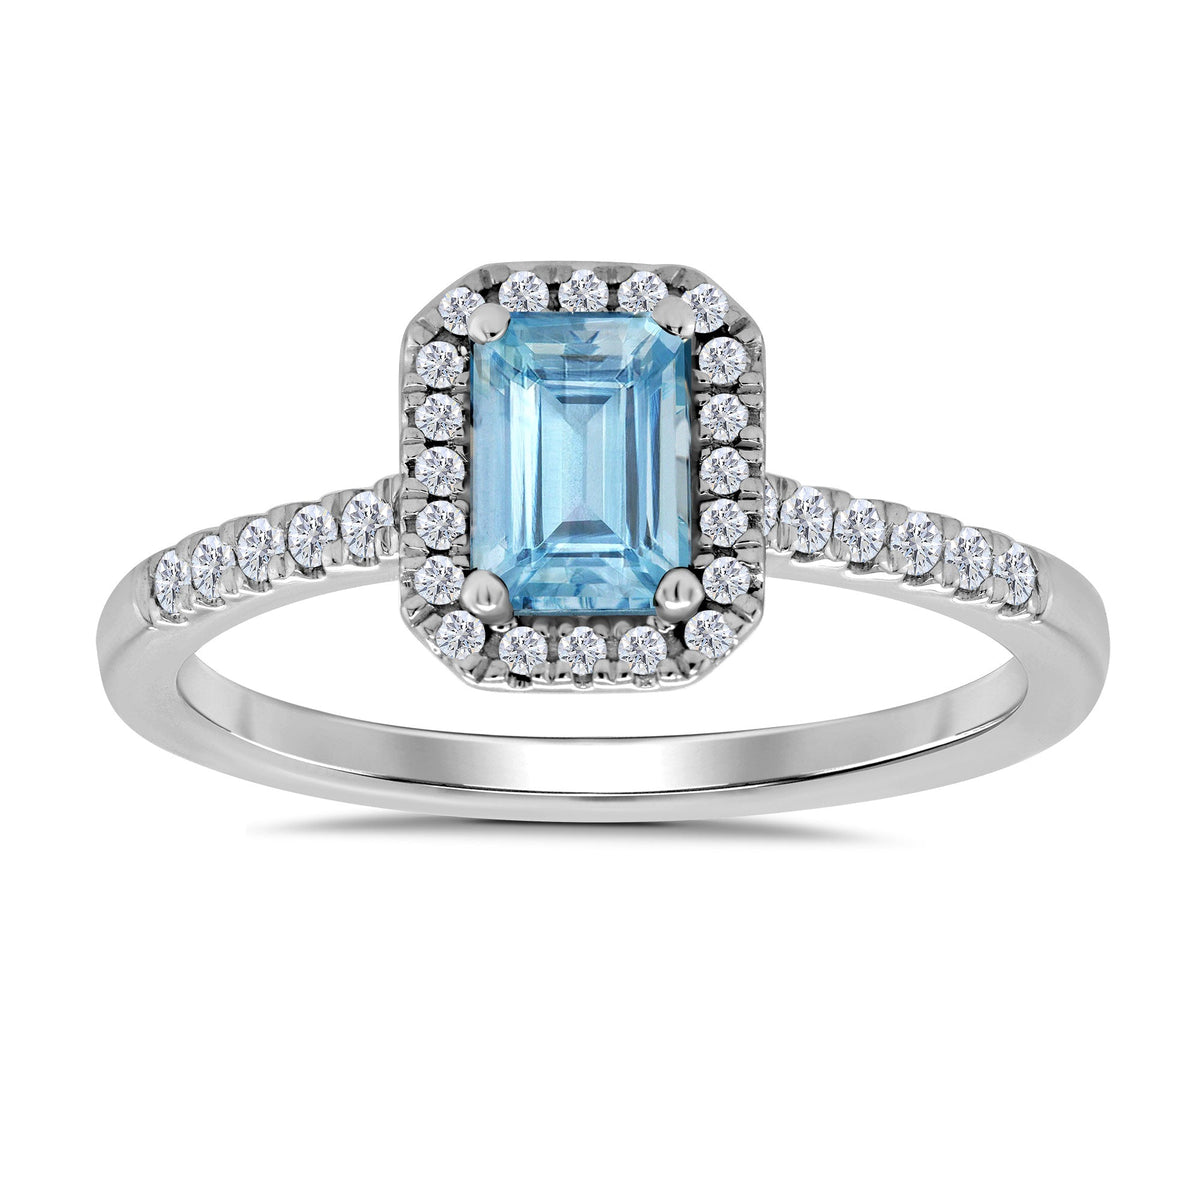 9ct white gold 6x4mm octagon cut aquamarine &amp; diamond cluster ring with diamond shoulders 0.20ct